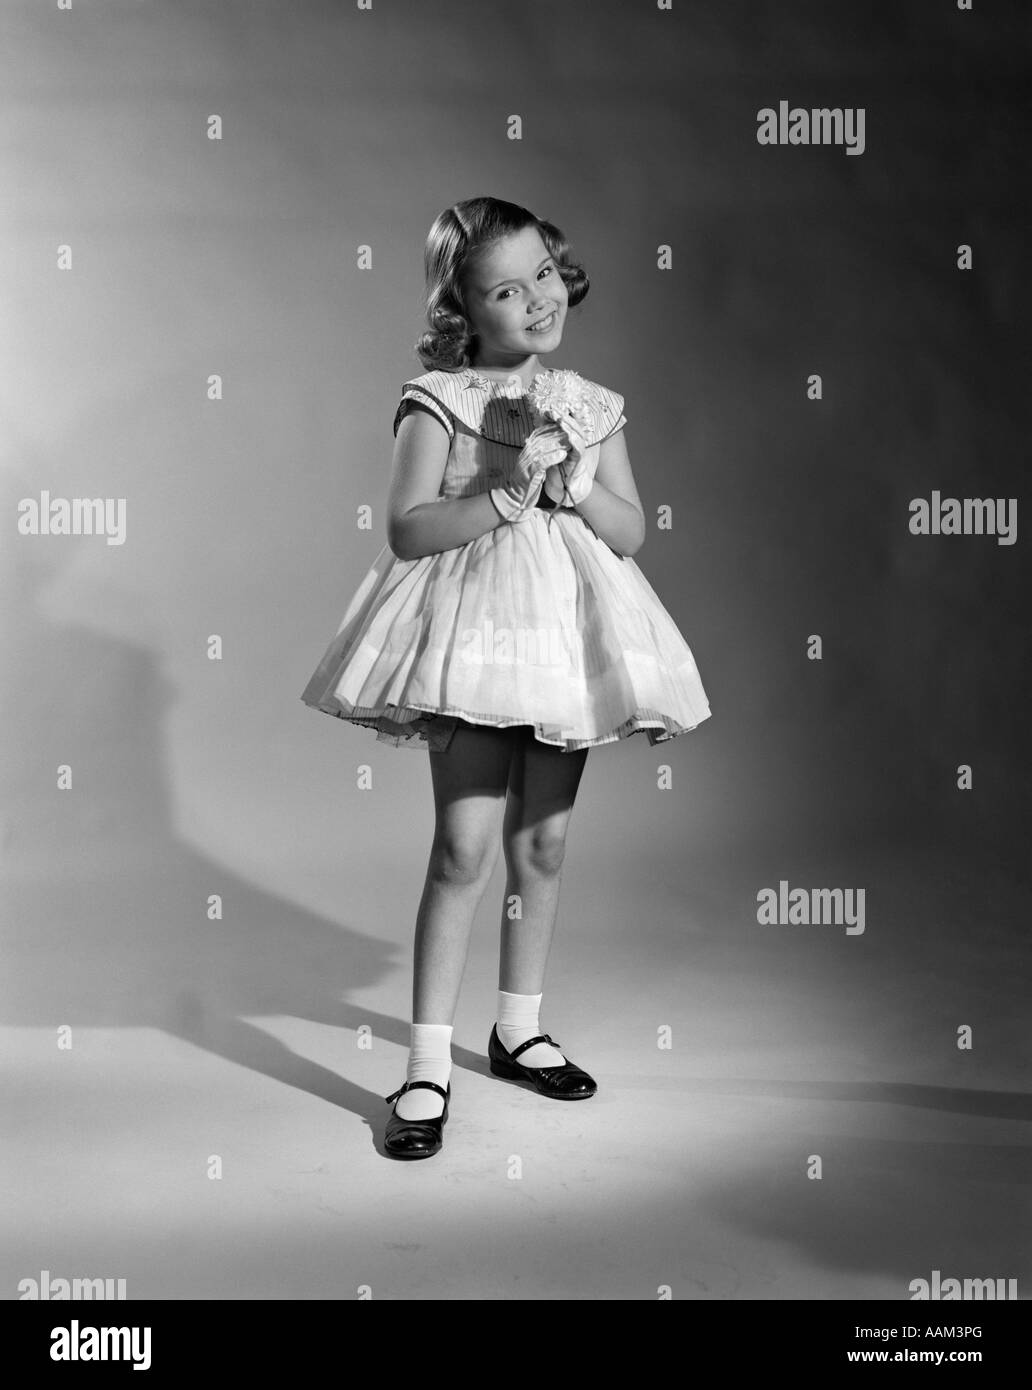 1950s PRETTY POSING GIRL SMILING FANCY DRESS WHITE GLOVES PATENT LEATHER SHOES FULL LENGTH SEAMLESS Stock Photo